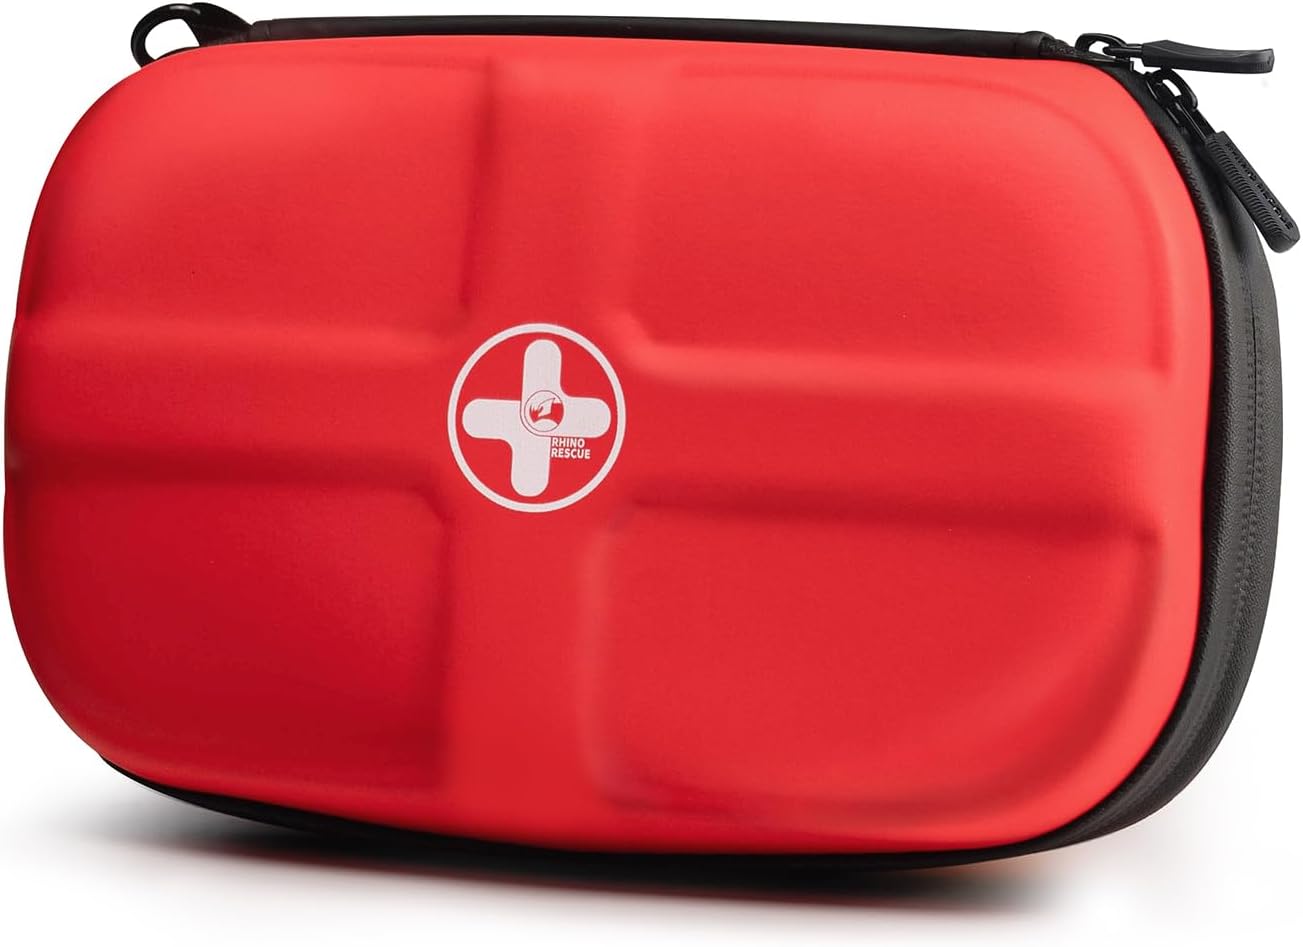 RHINO RESCUE: Compact & Portable First Aid Kit for Outdoors, Home, Hiking, Working